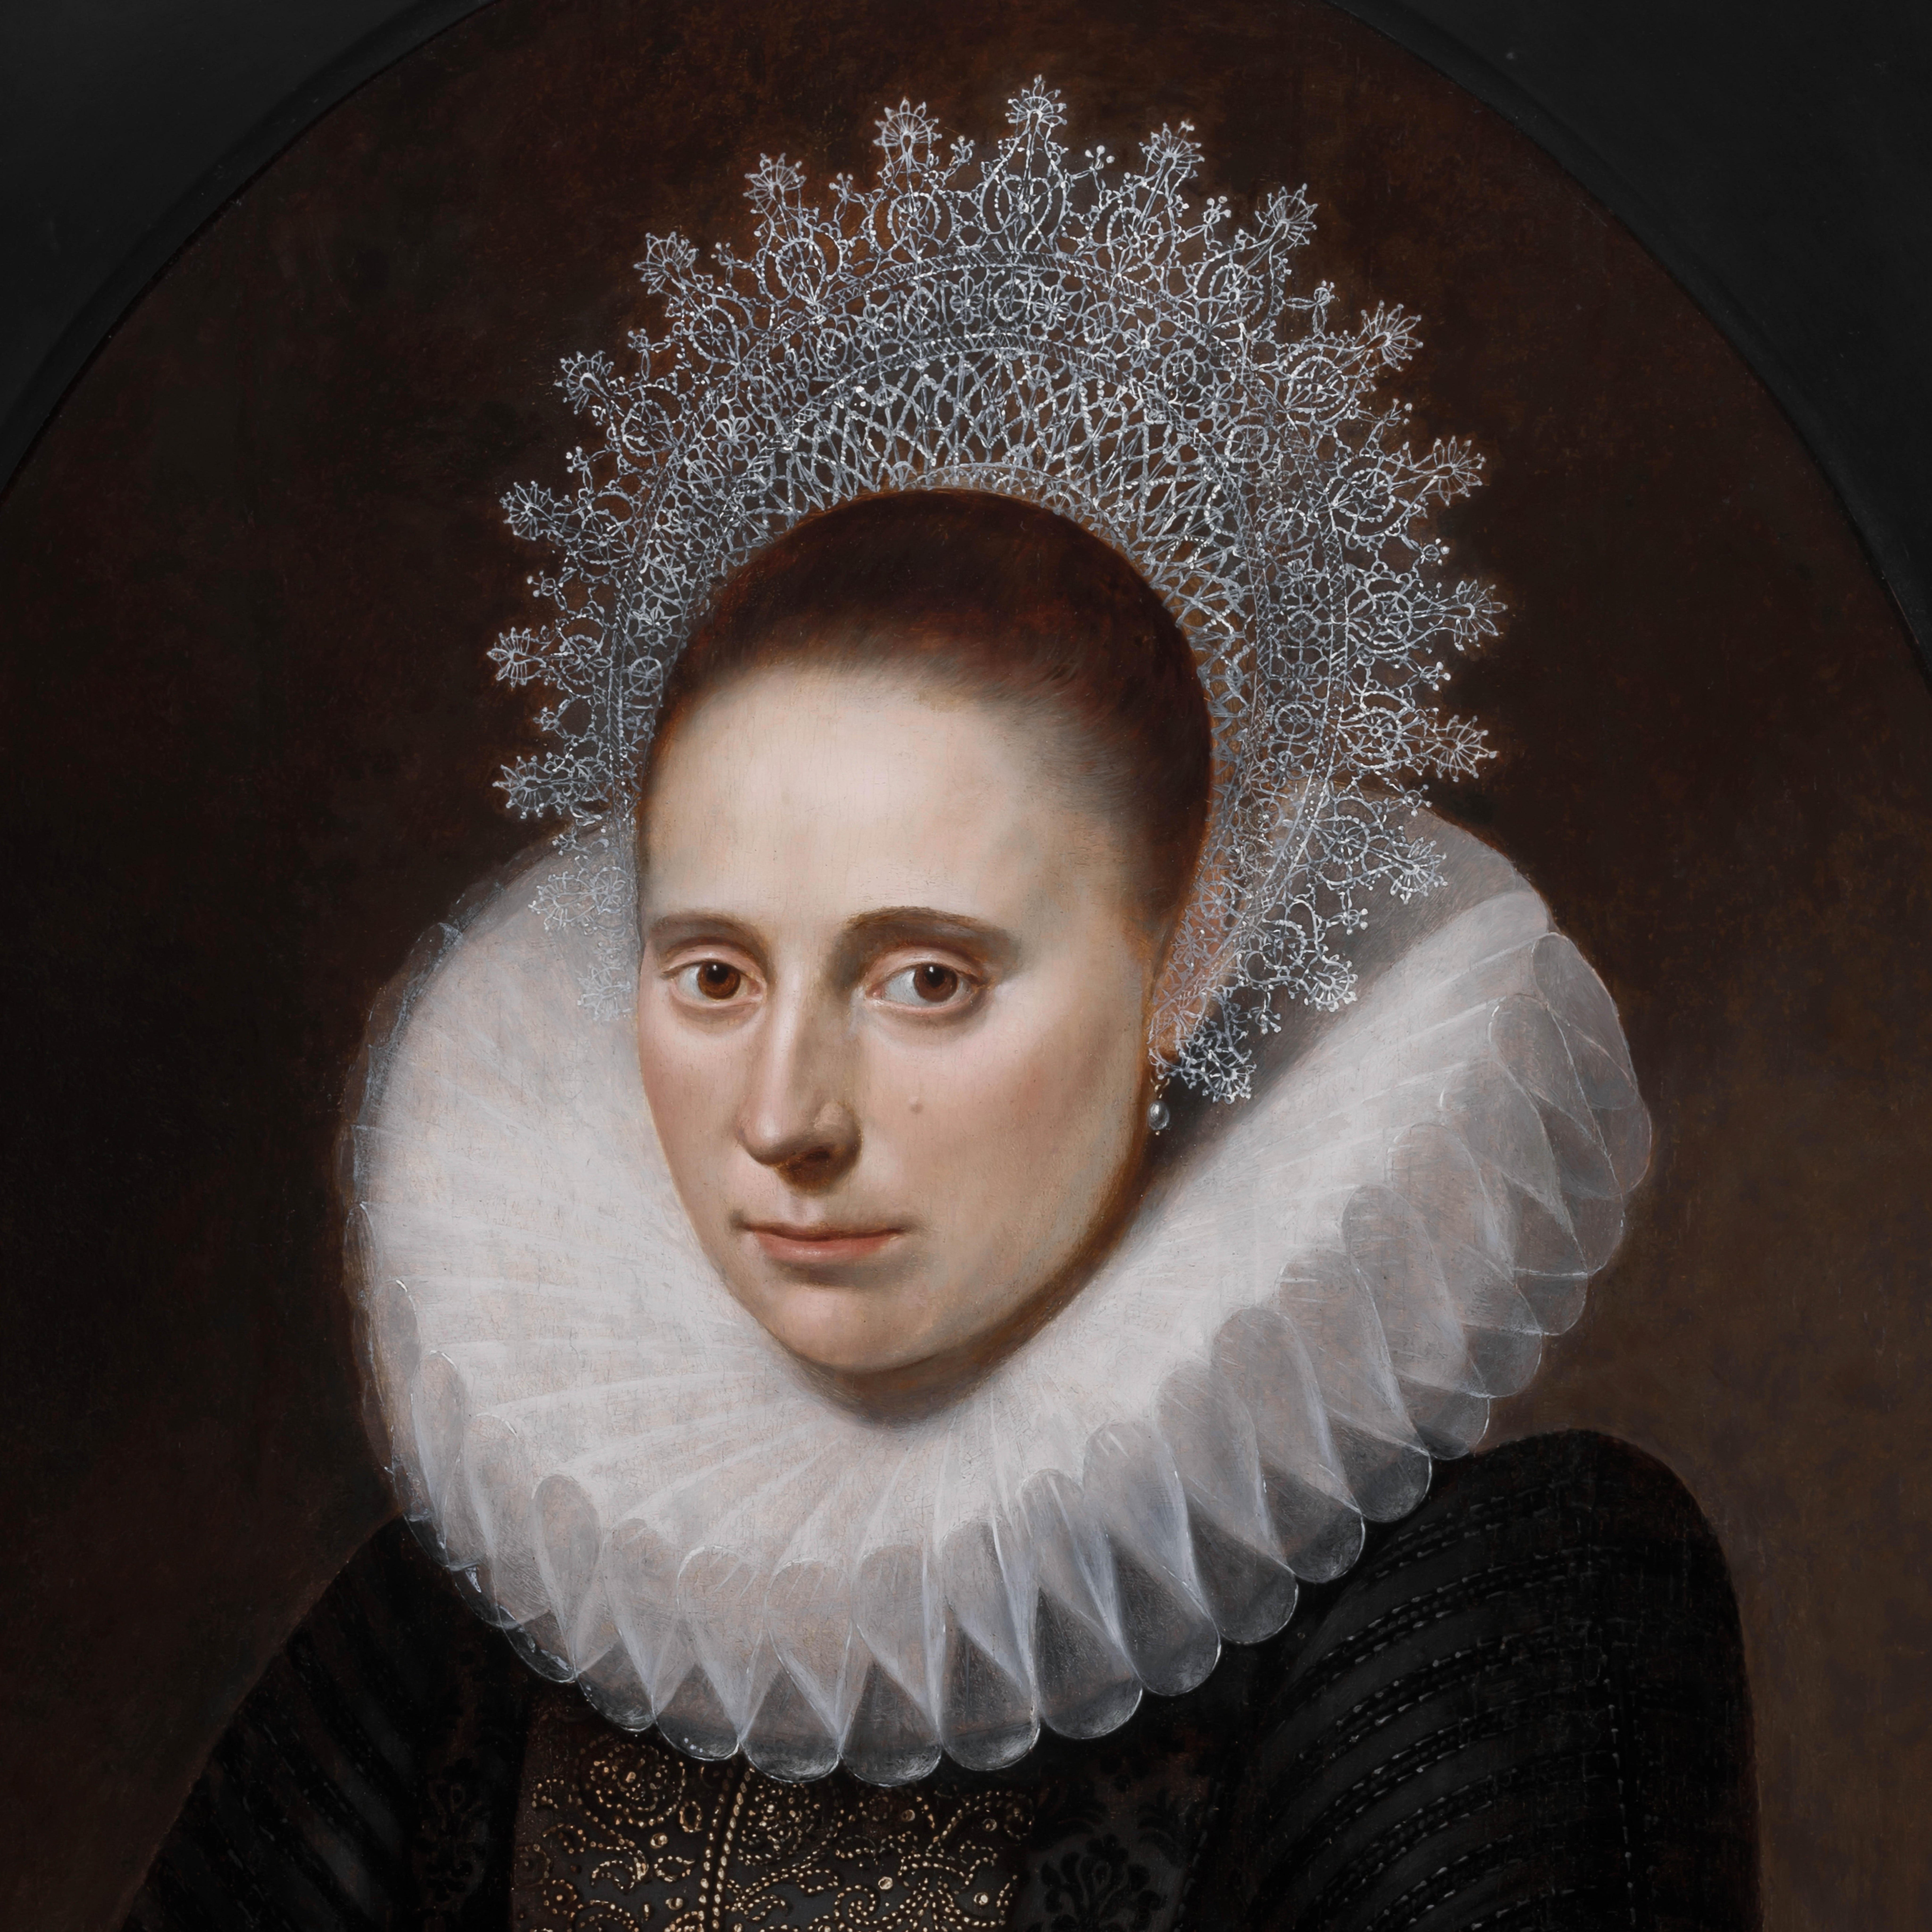 Portrait of a Lady in an Elaborate Ruff & Lace Coif c.1610-20, Dutch Old Master For Sale 2